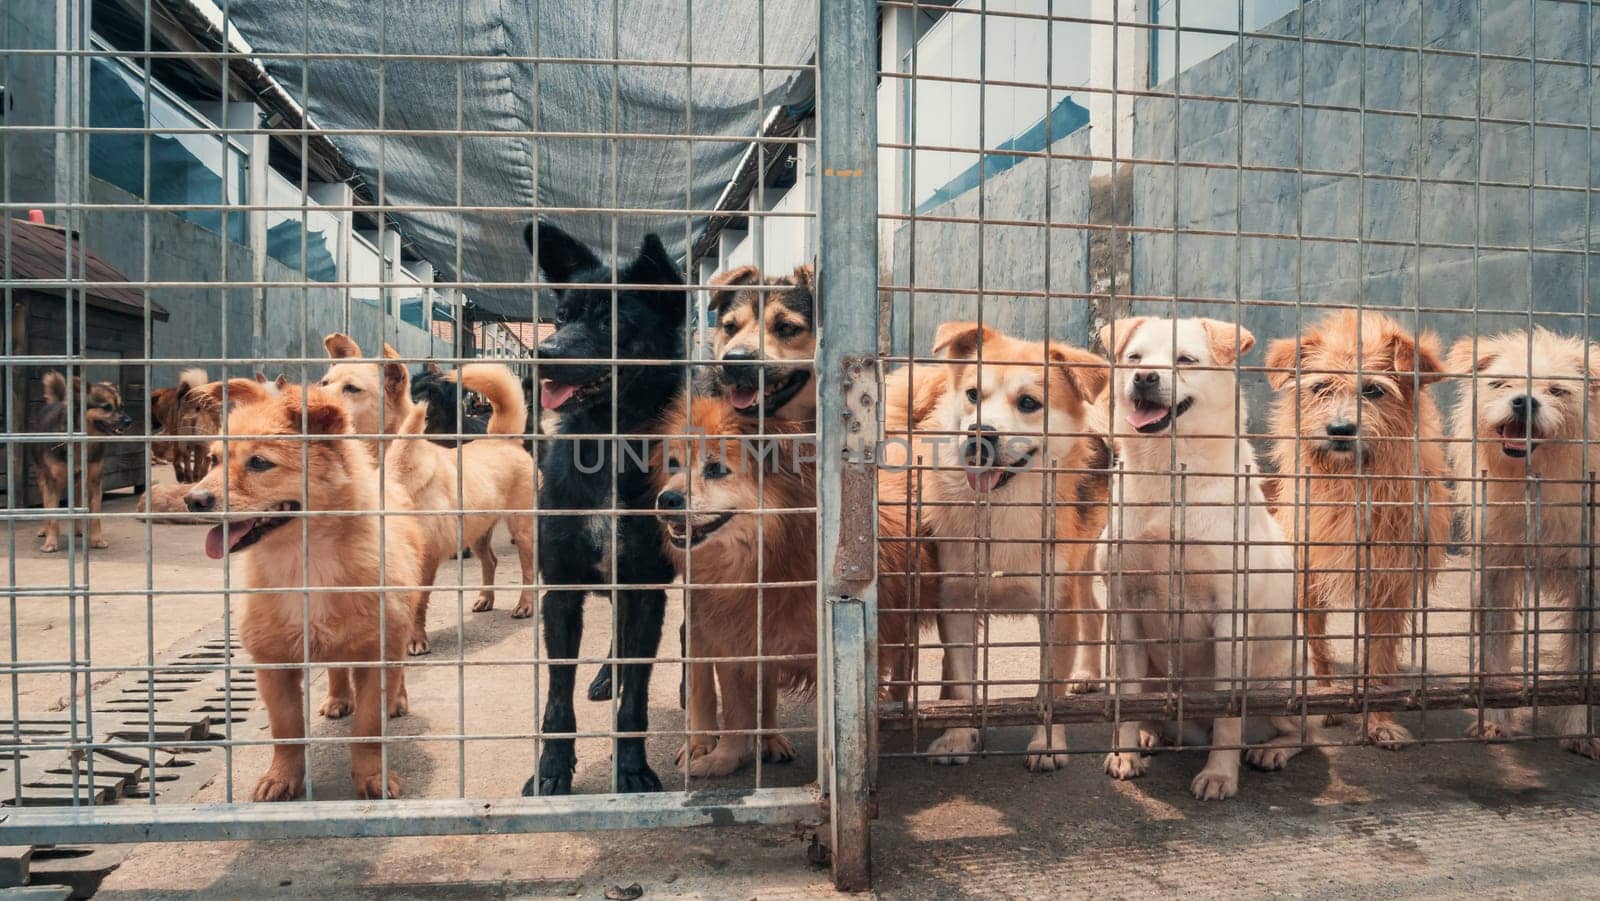 Unwanted and homeless dogs of different breeds in animal shelter. Looking and waiting for people to come adopt. Shelter for animals concept by Busker